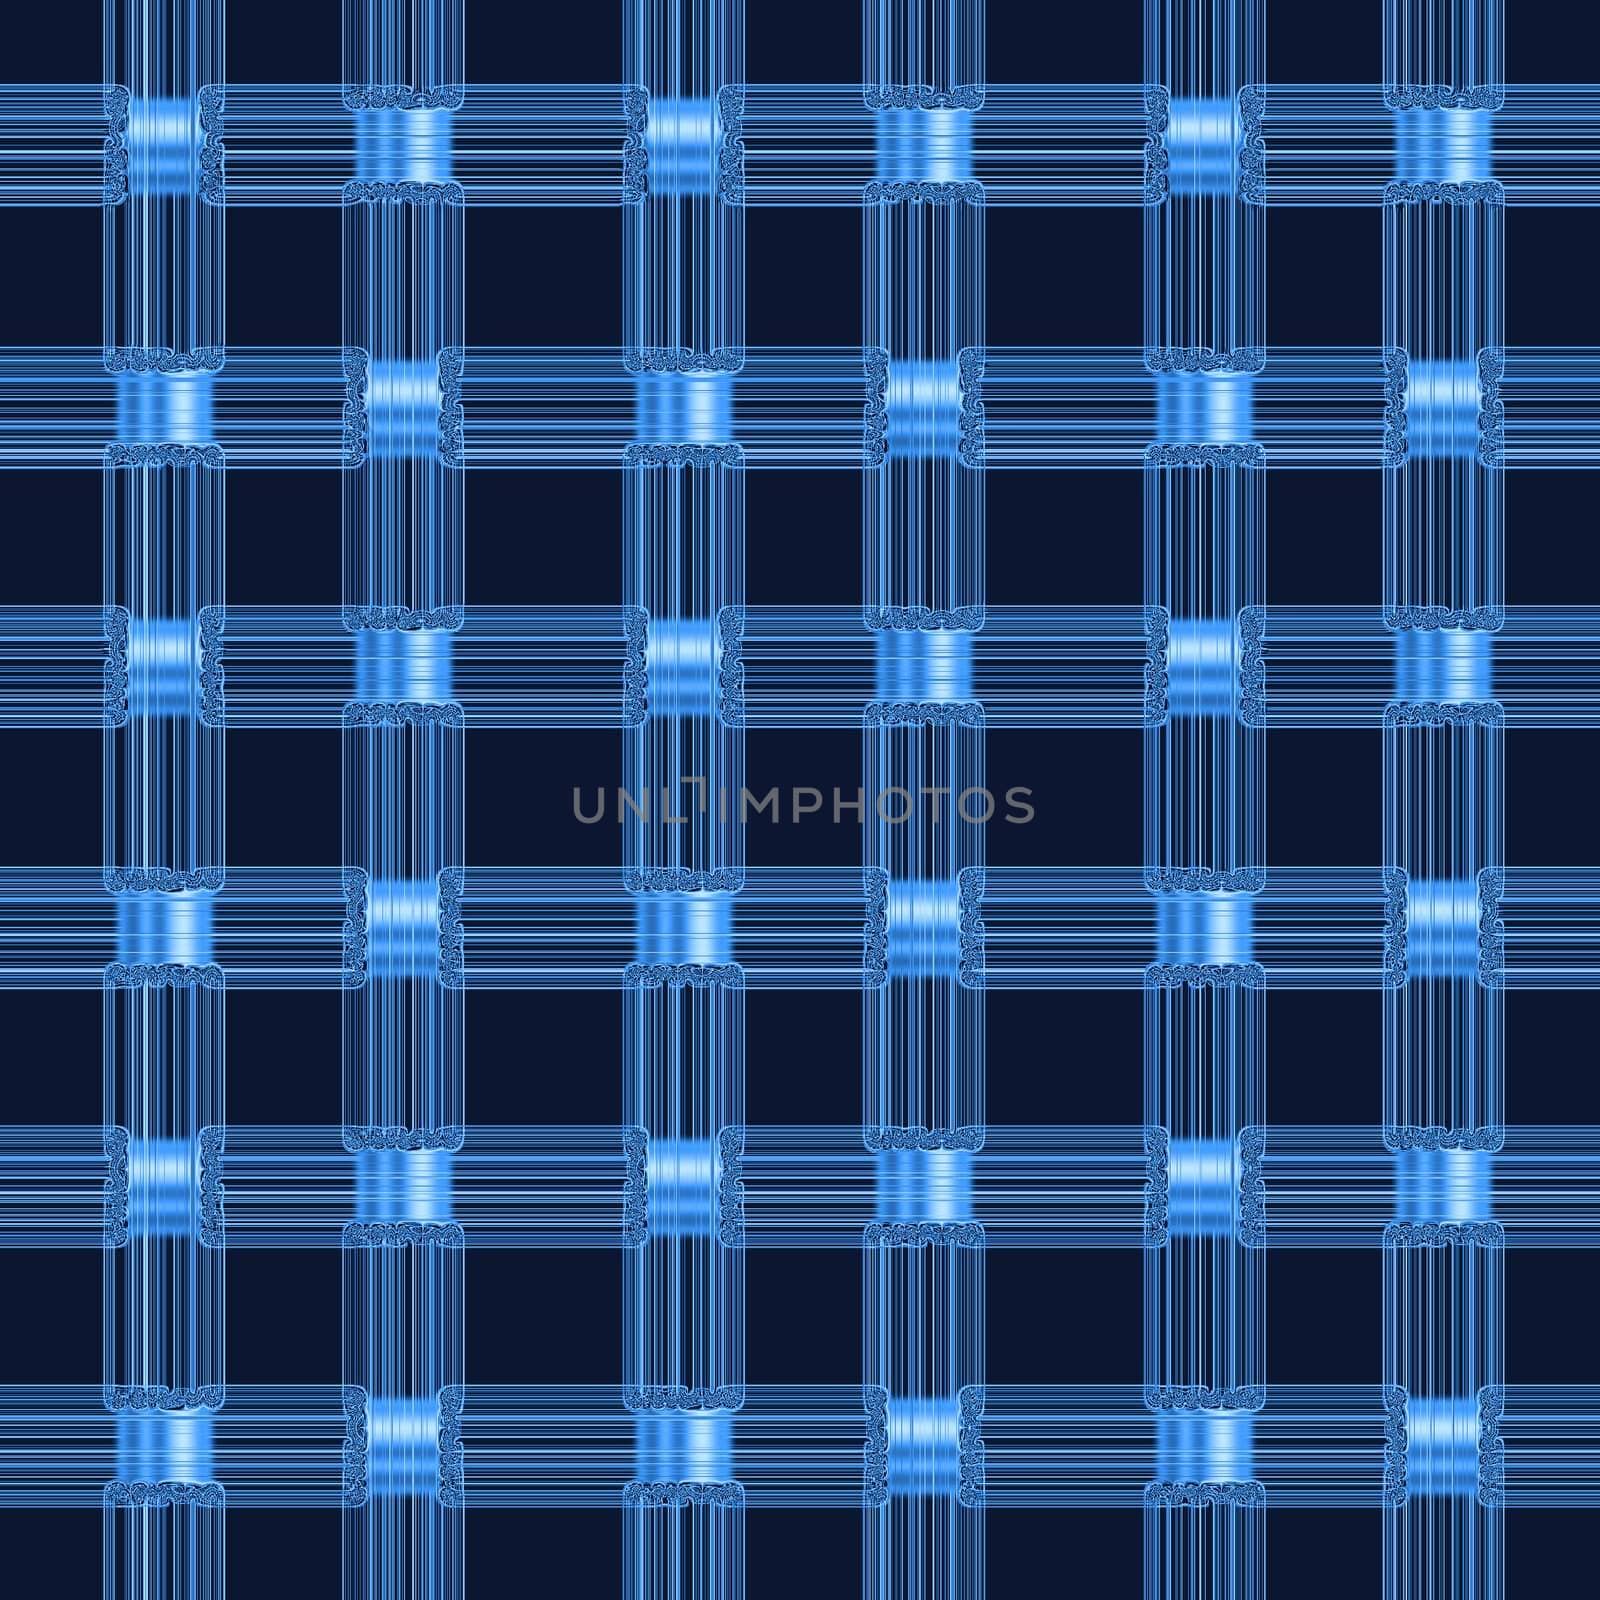 Pattern with blue stripes, abstract art background